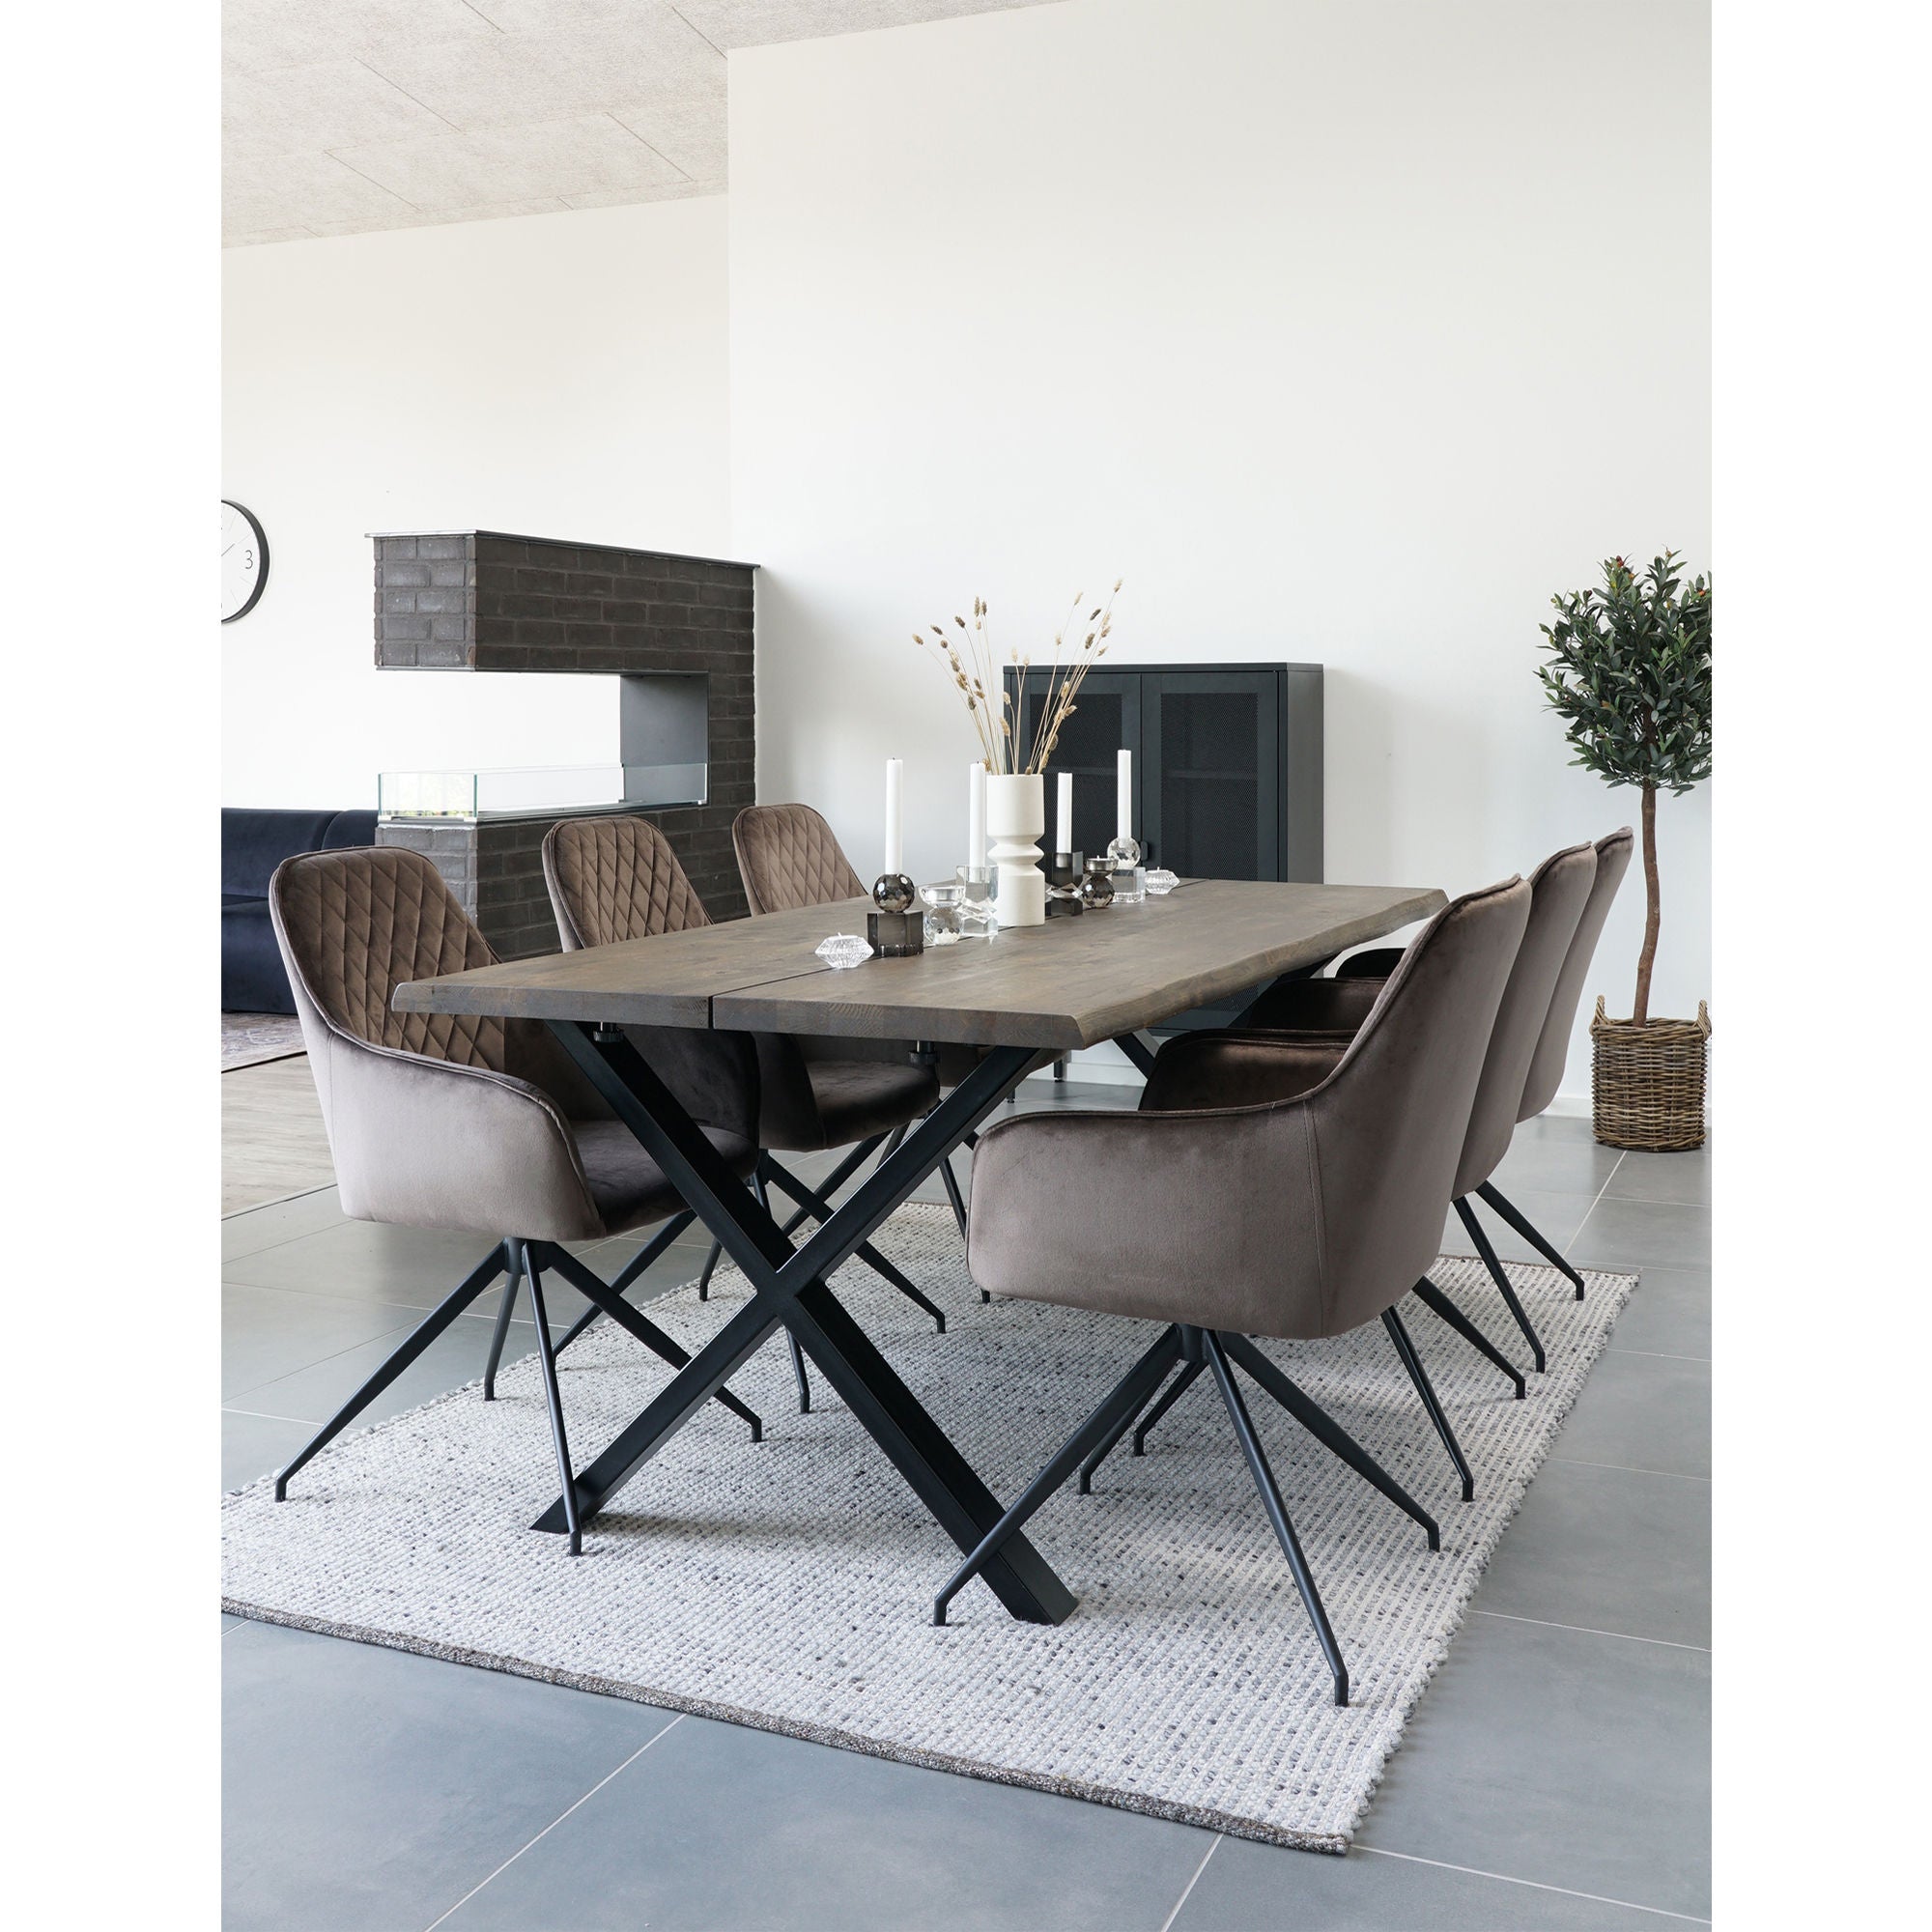 House Nordic Harbo Dining Chair with Swivel